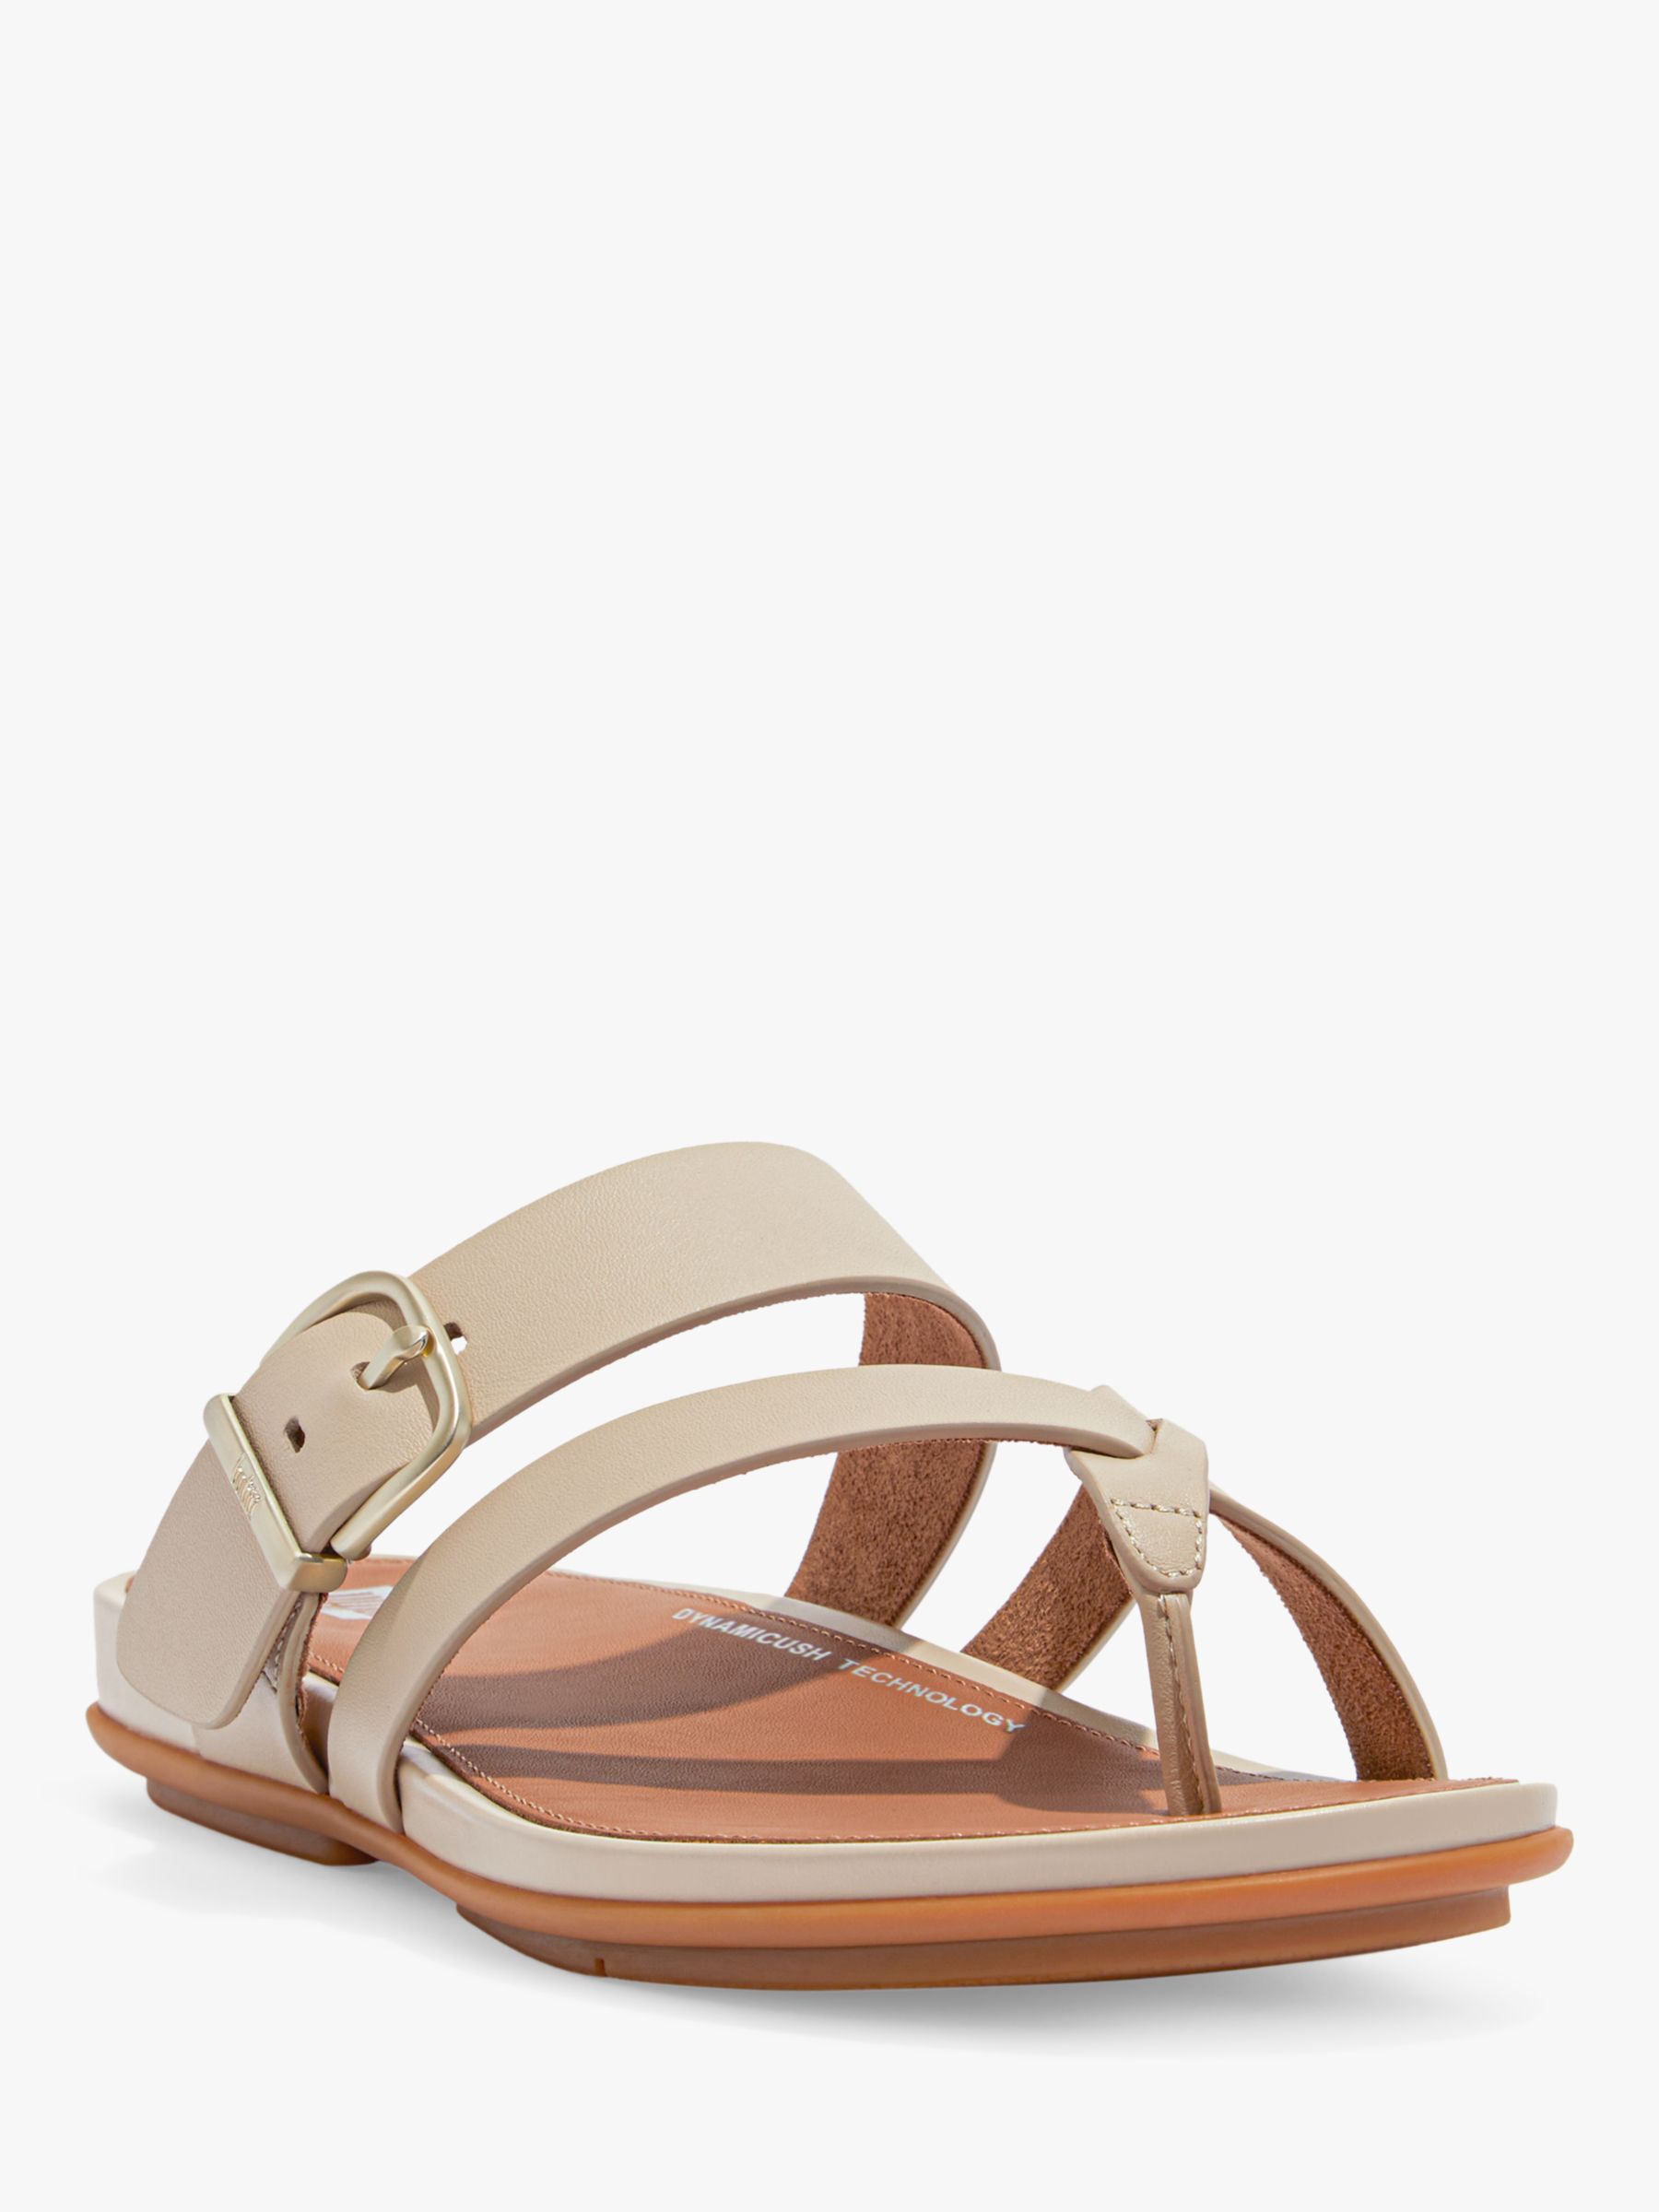 FitFlop Gracie Leather Strappy Toe Post Sandals, Stone Beige, 3